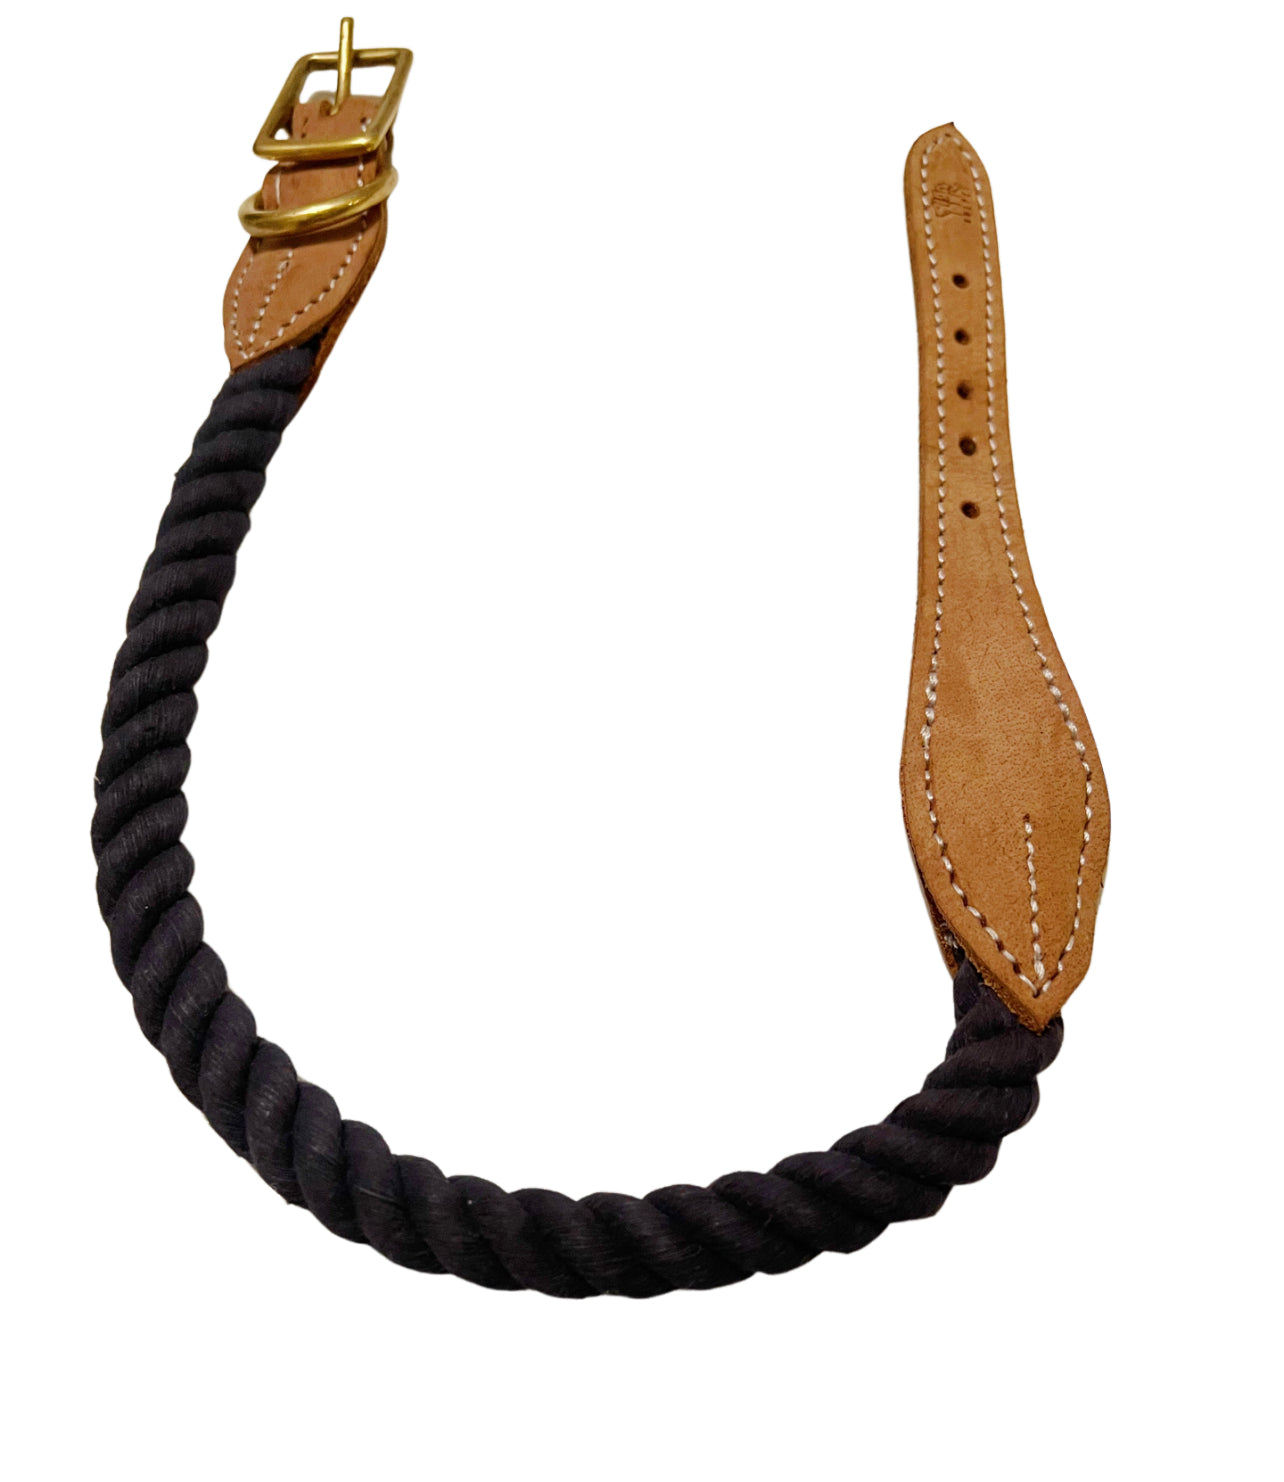 BULPET Eco Friendly Natural Cotton Durable Dog or Cat Navy Blue Rope Collar with Brown Leather and Gold Brass Hardware/ All Dogs